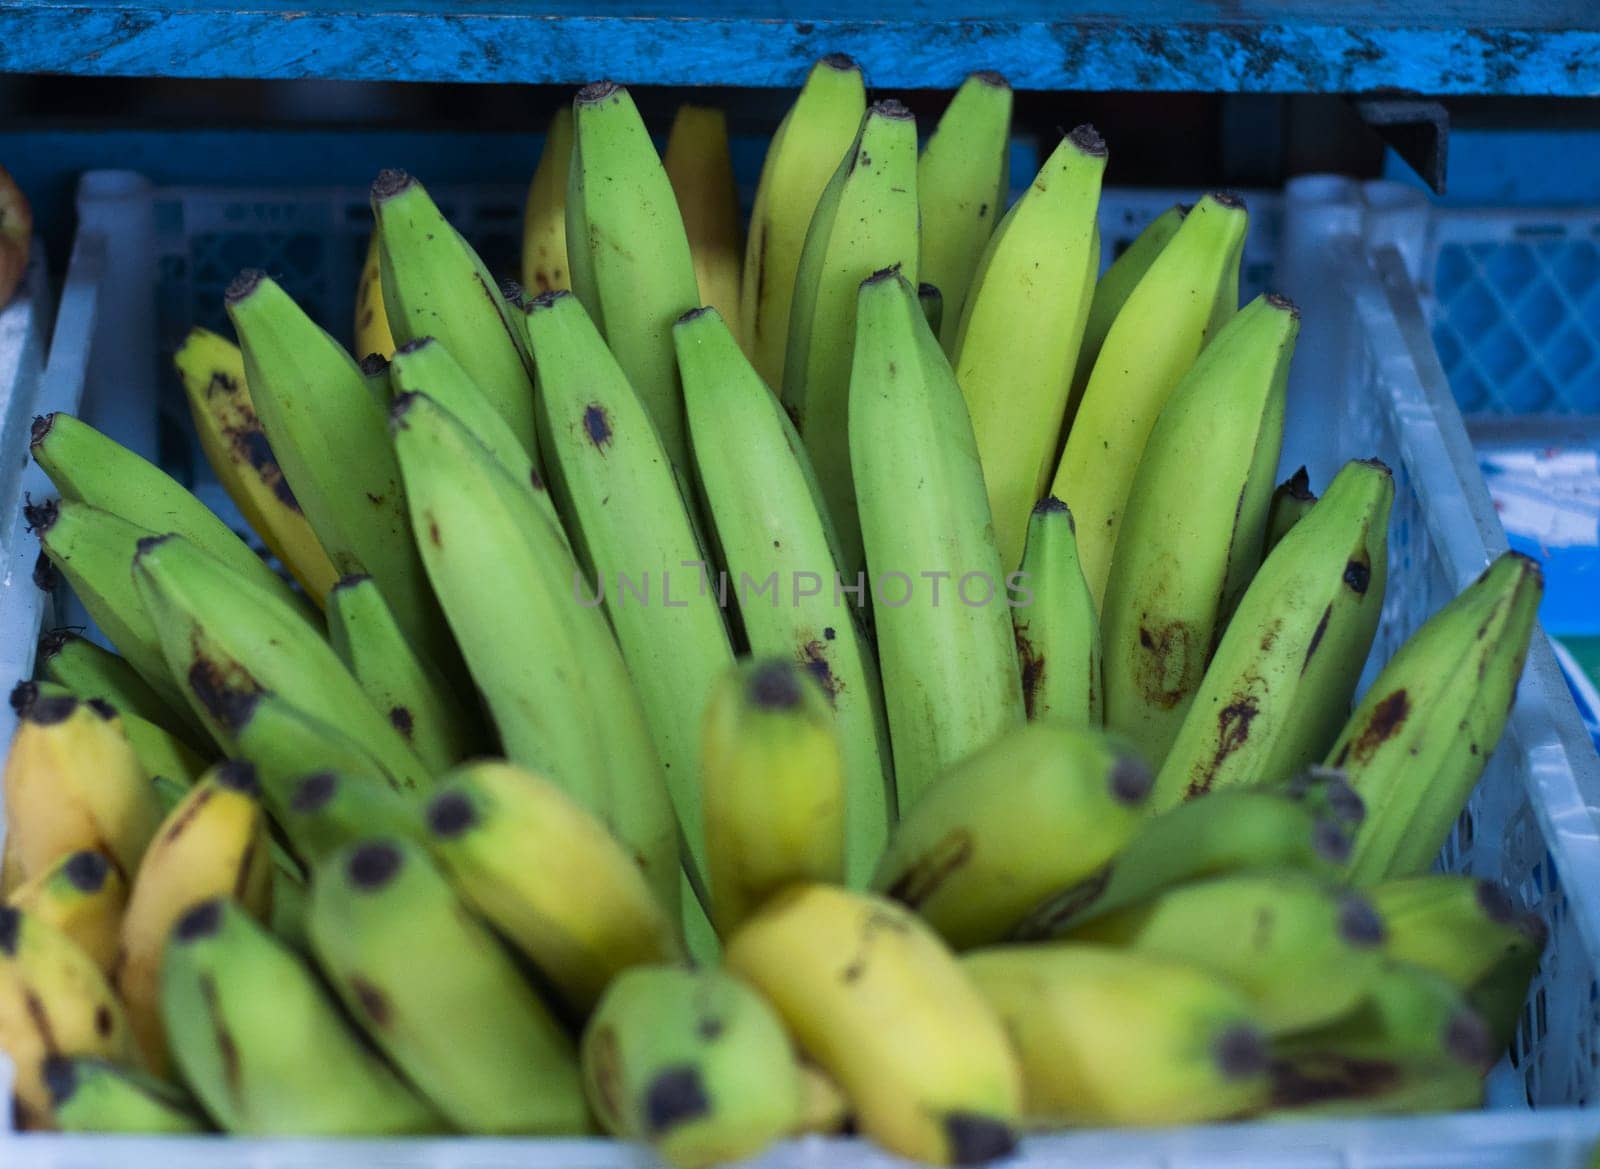 Bunch of many green and some yellow bananas by Raulmartin